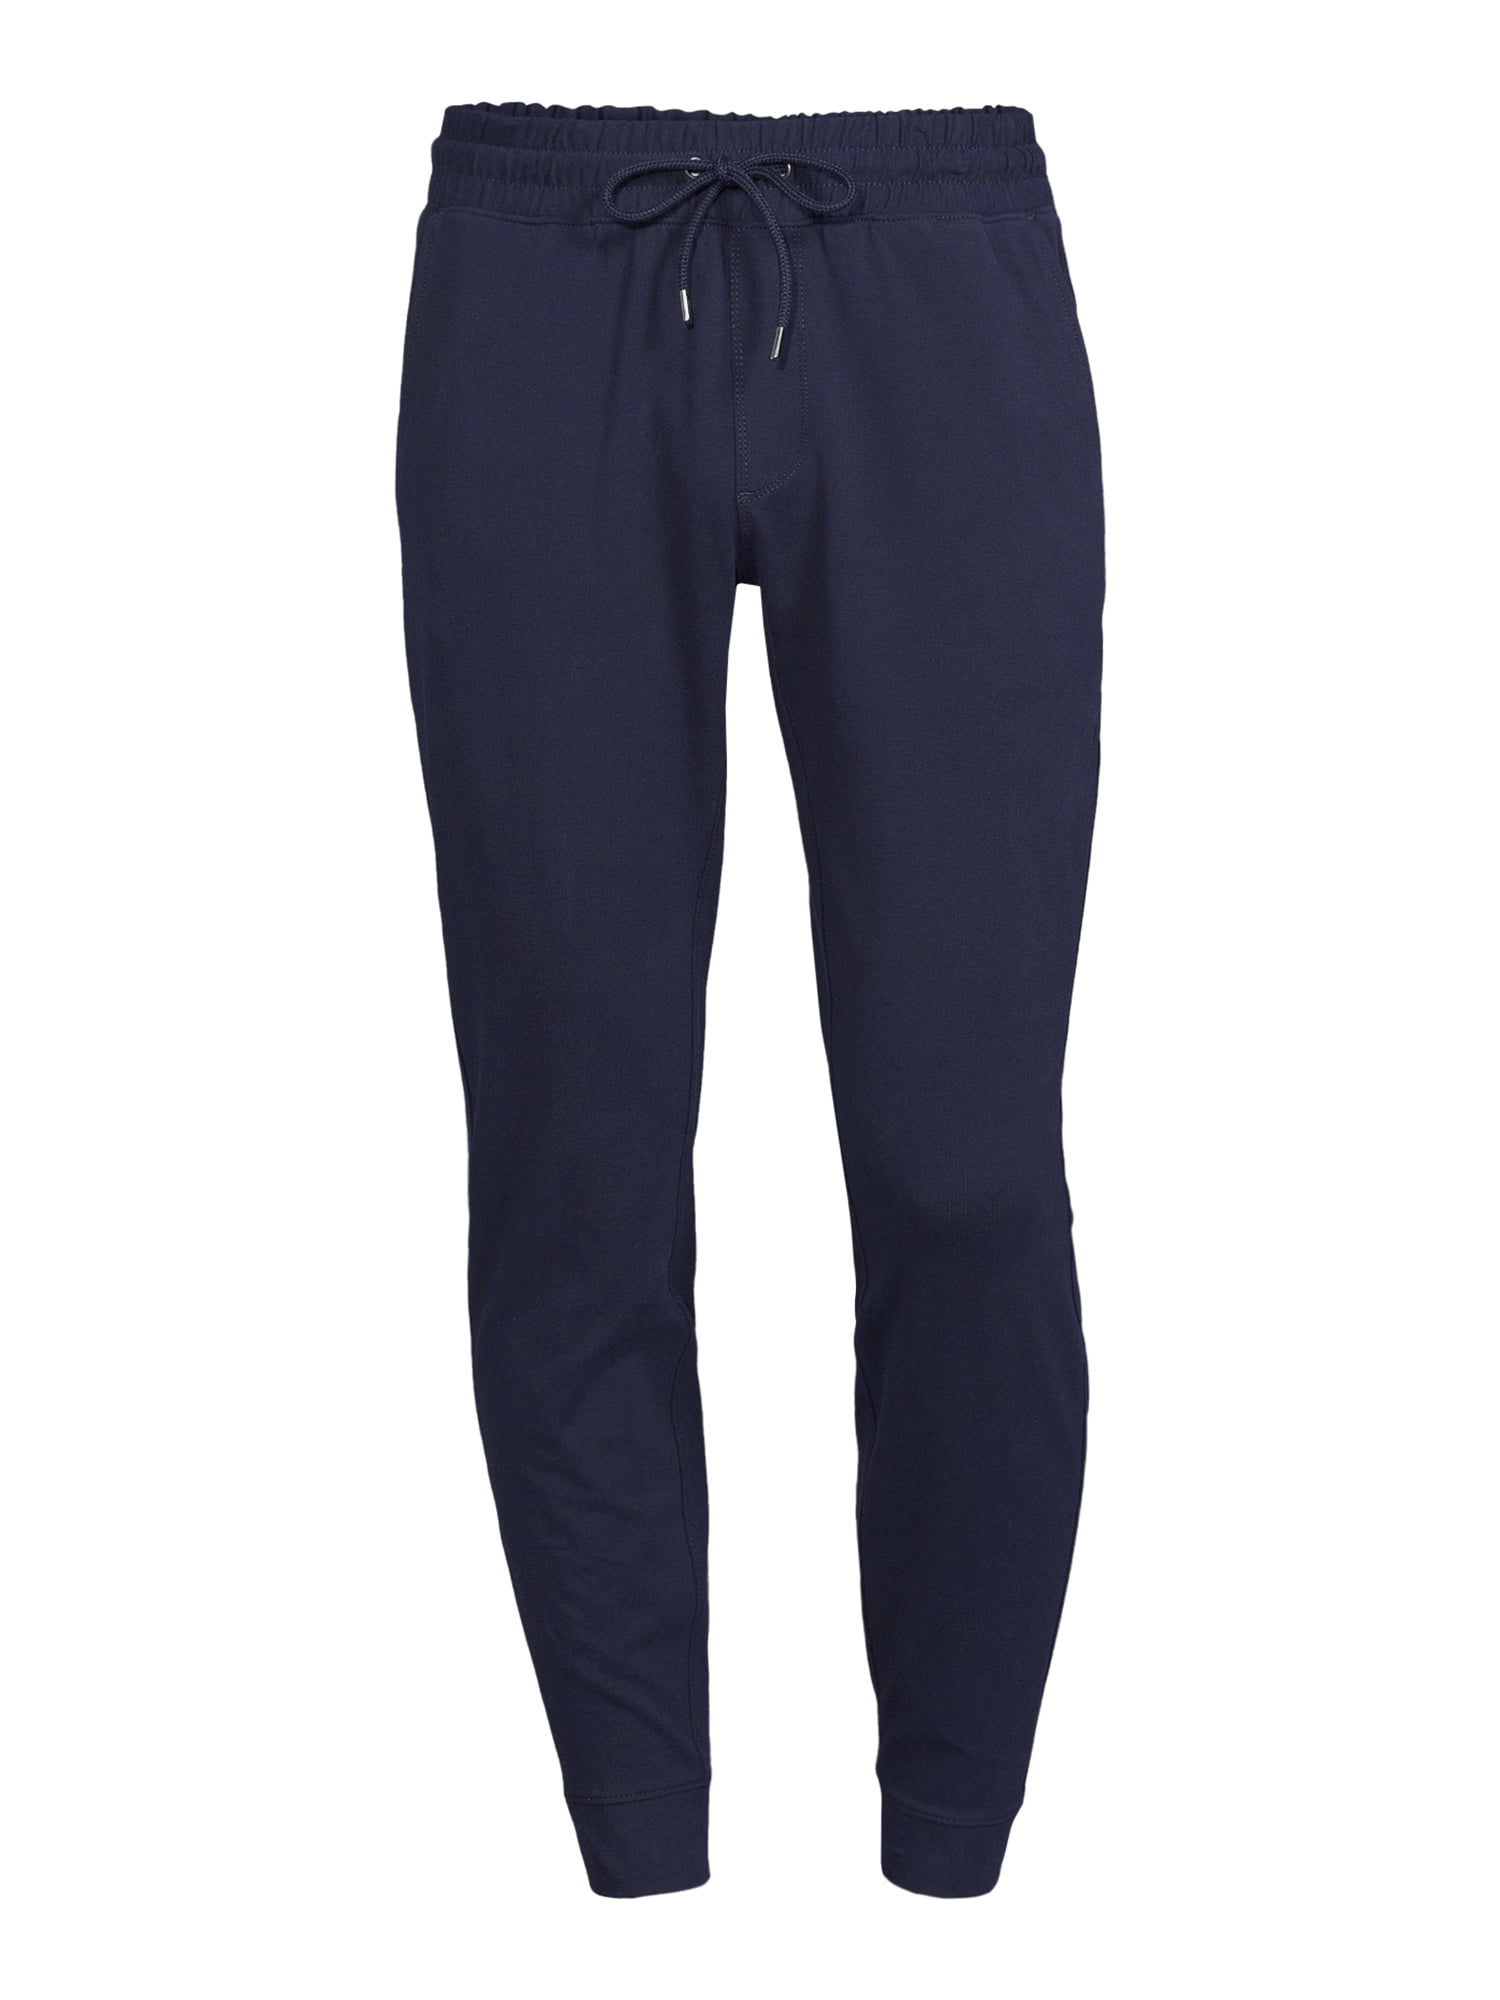 discount 91% WOMEN FASHION Trousers Tracksuit and joggers Straight Navy Blue M NoName tracksuit and joggers 